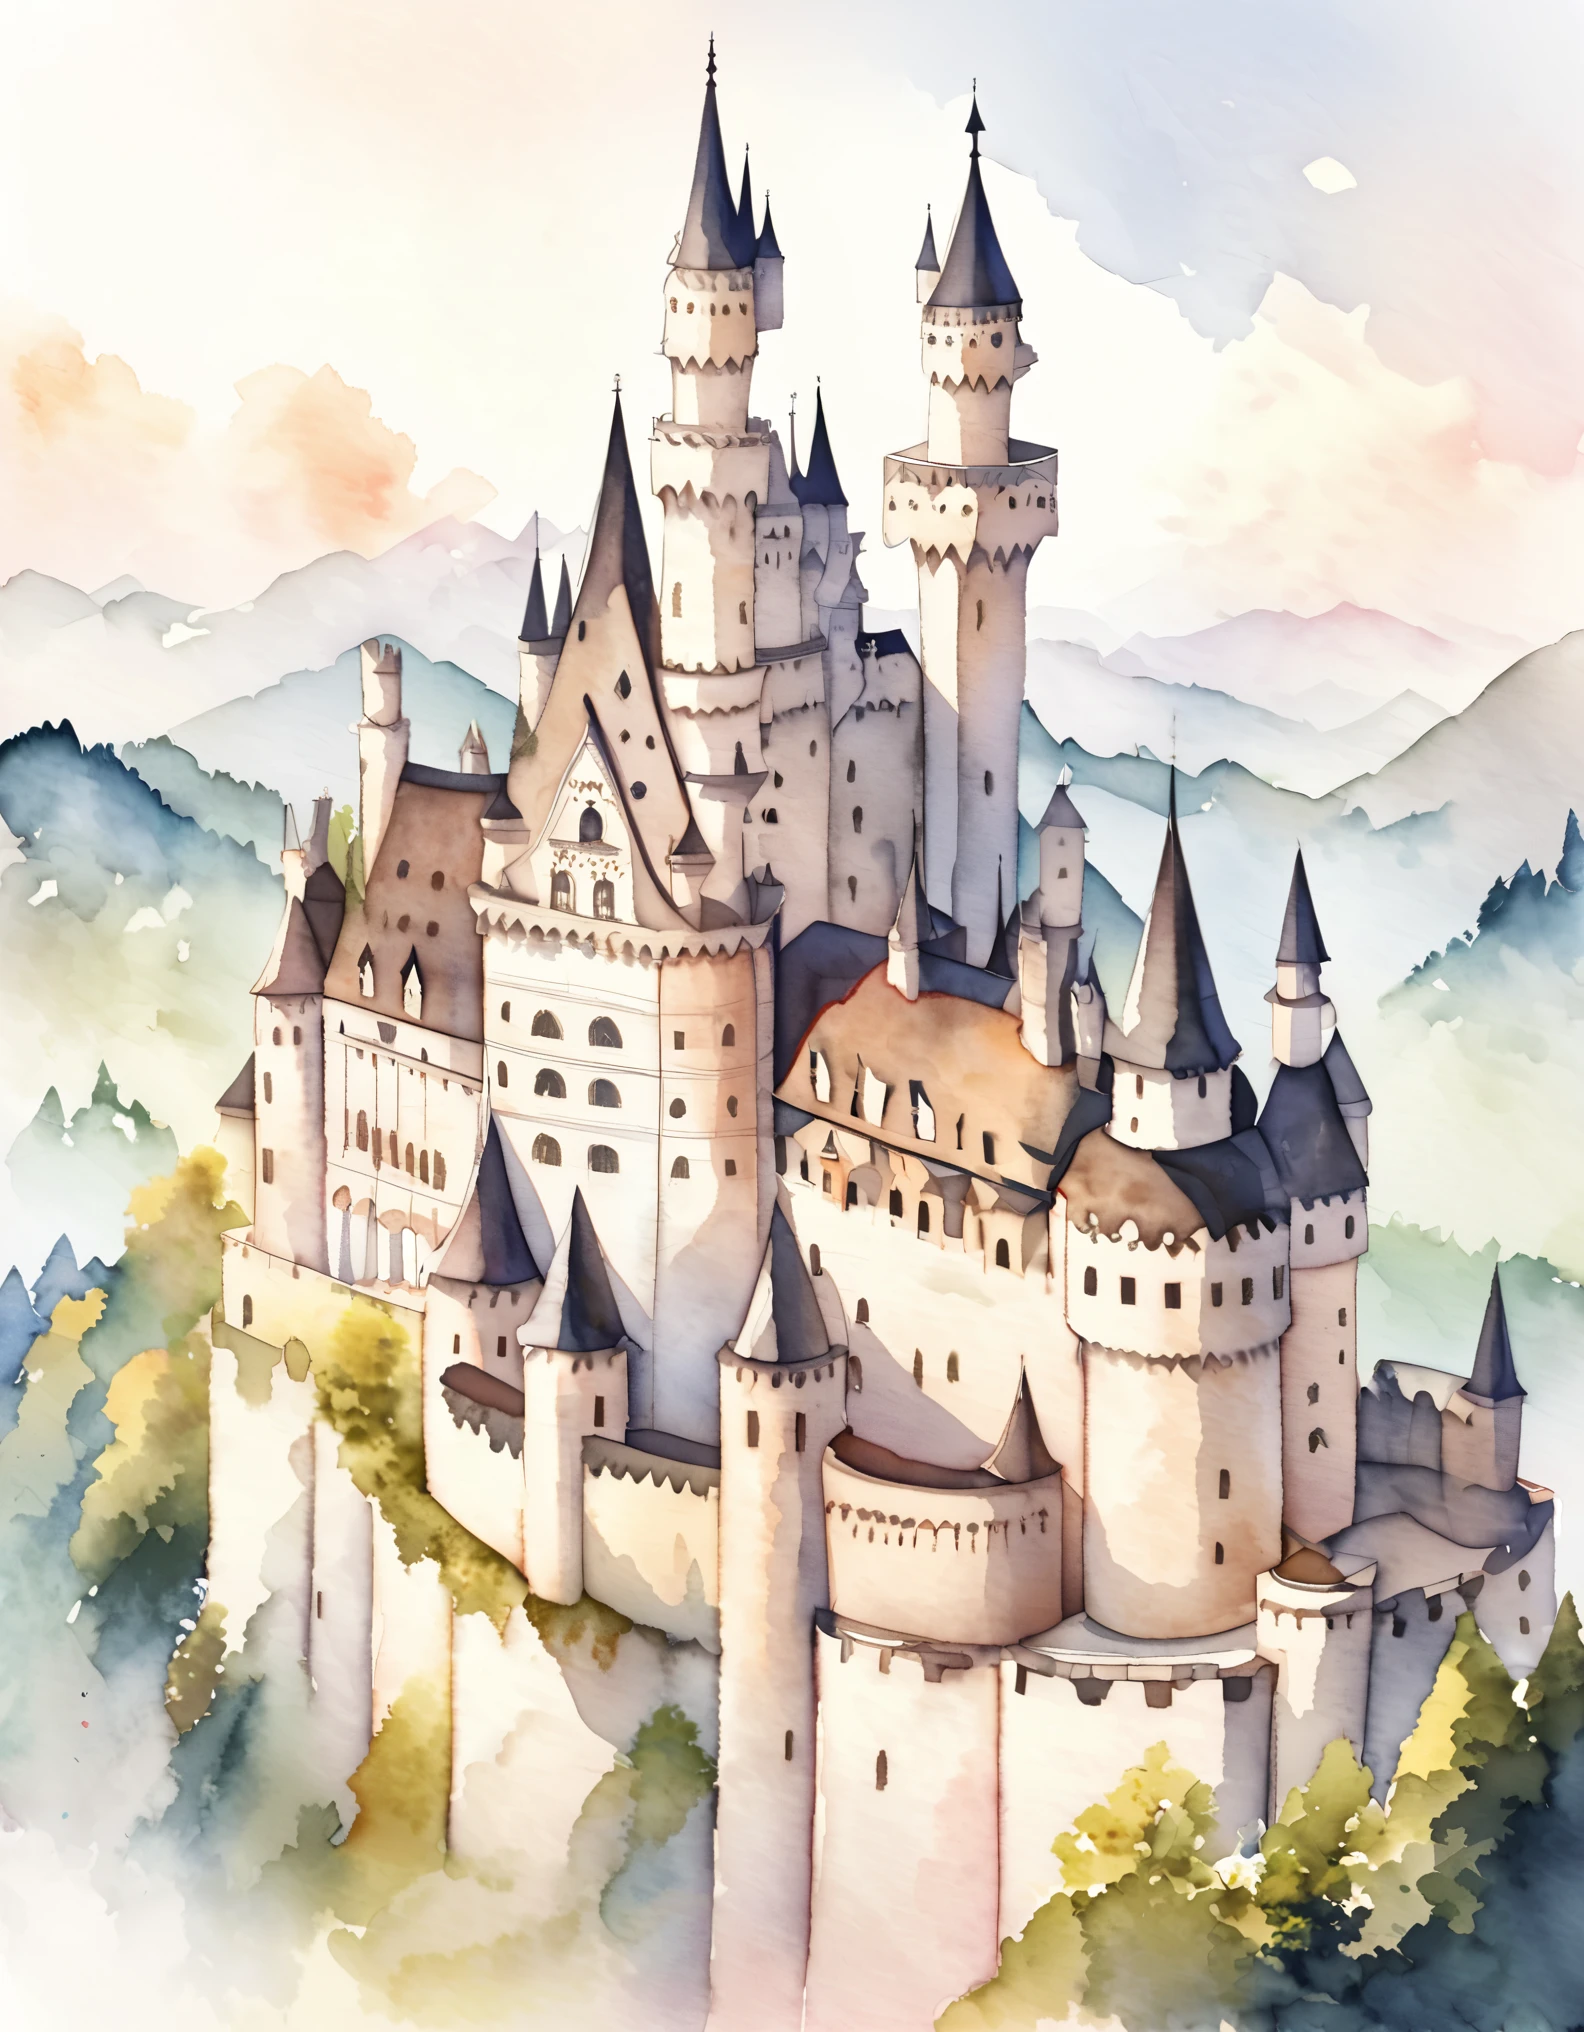 Neuschwanstein Castle, The exterior walls are made of brick covered with white limestone., A romantic castle for a king chasing an unfulfilled dream, Beautiful castle, Castles in Germany, Built on a hill, Watercolor:1.2, Whimsical and delicate, Like an illustration in a children&#39;s book, Gentle brushwork, Dim, The pale colors create a fantastical look.